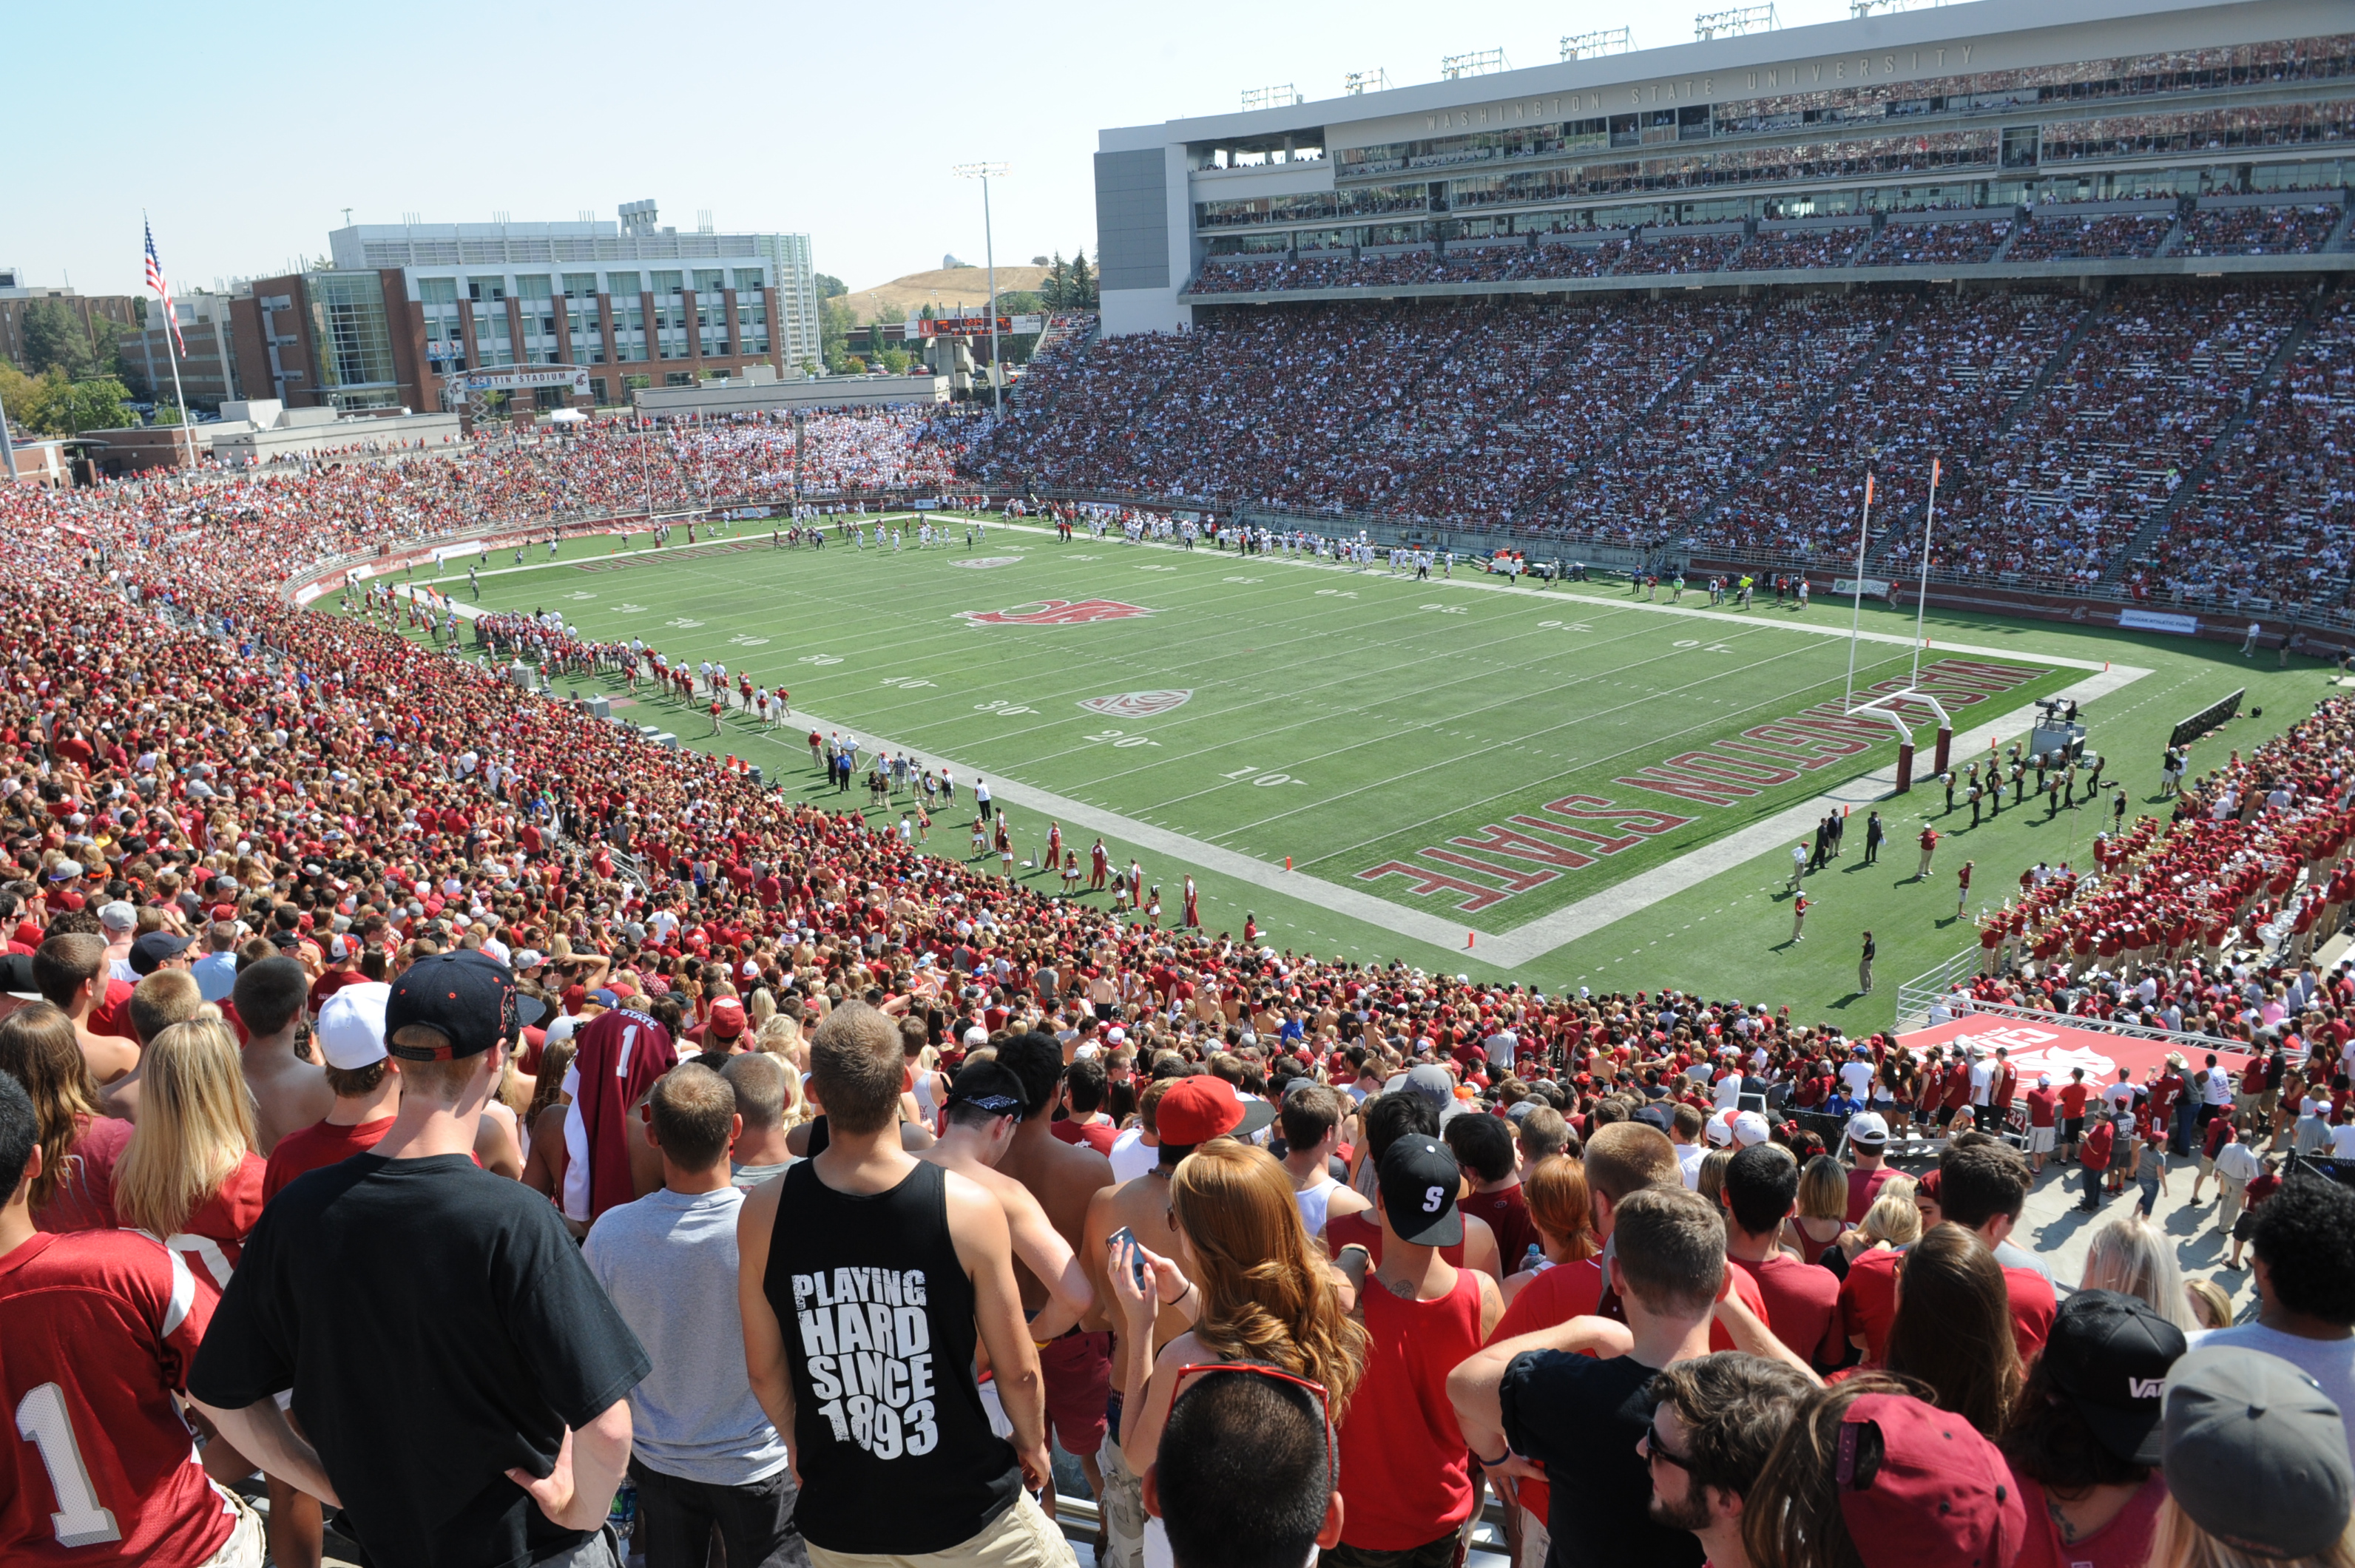 Phot of students at a football game in WSU's stadium